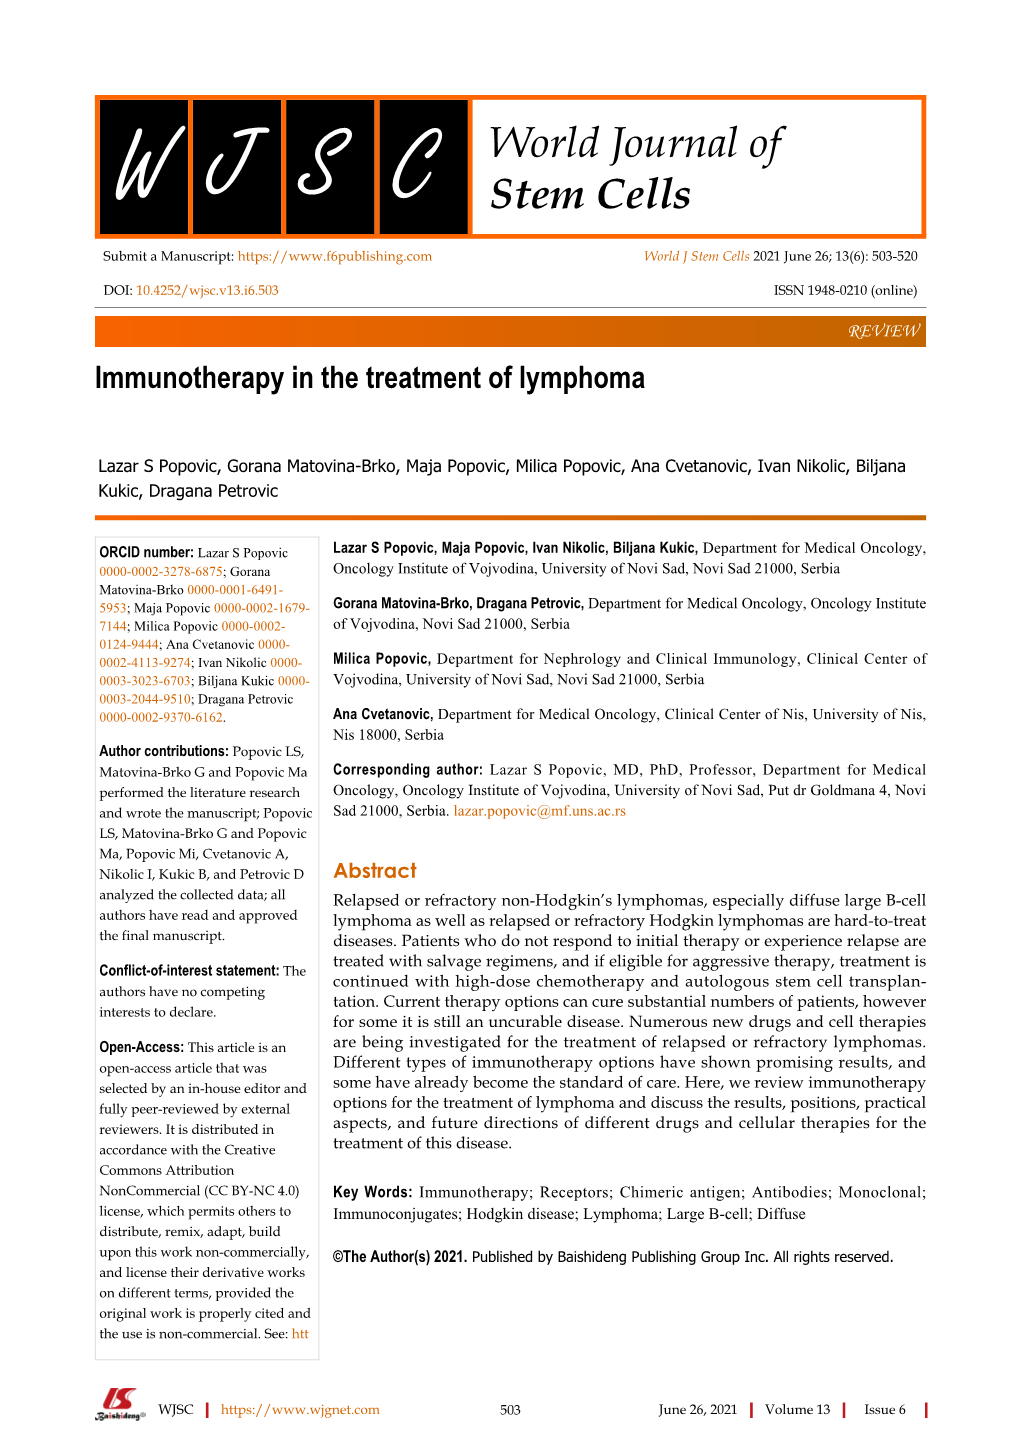 Immunotherapy in the Treatment of Lymphoma